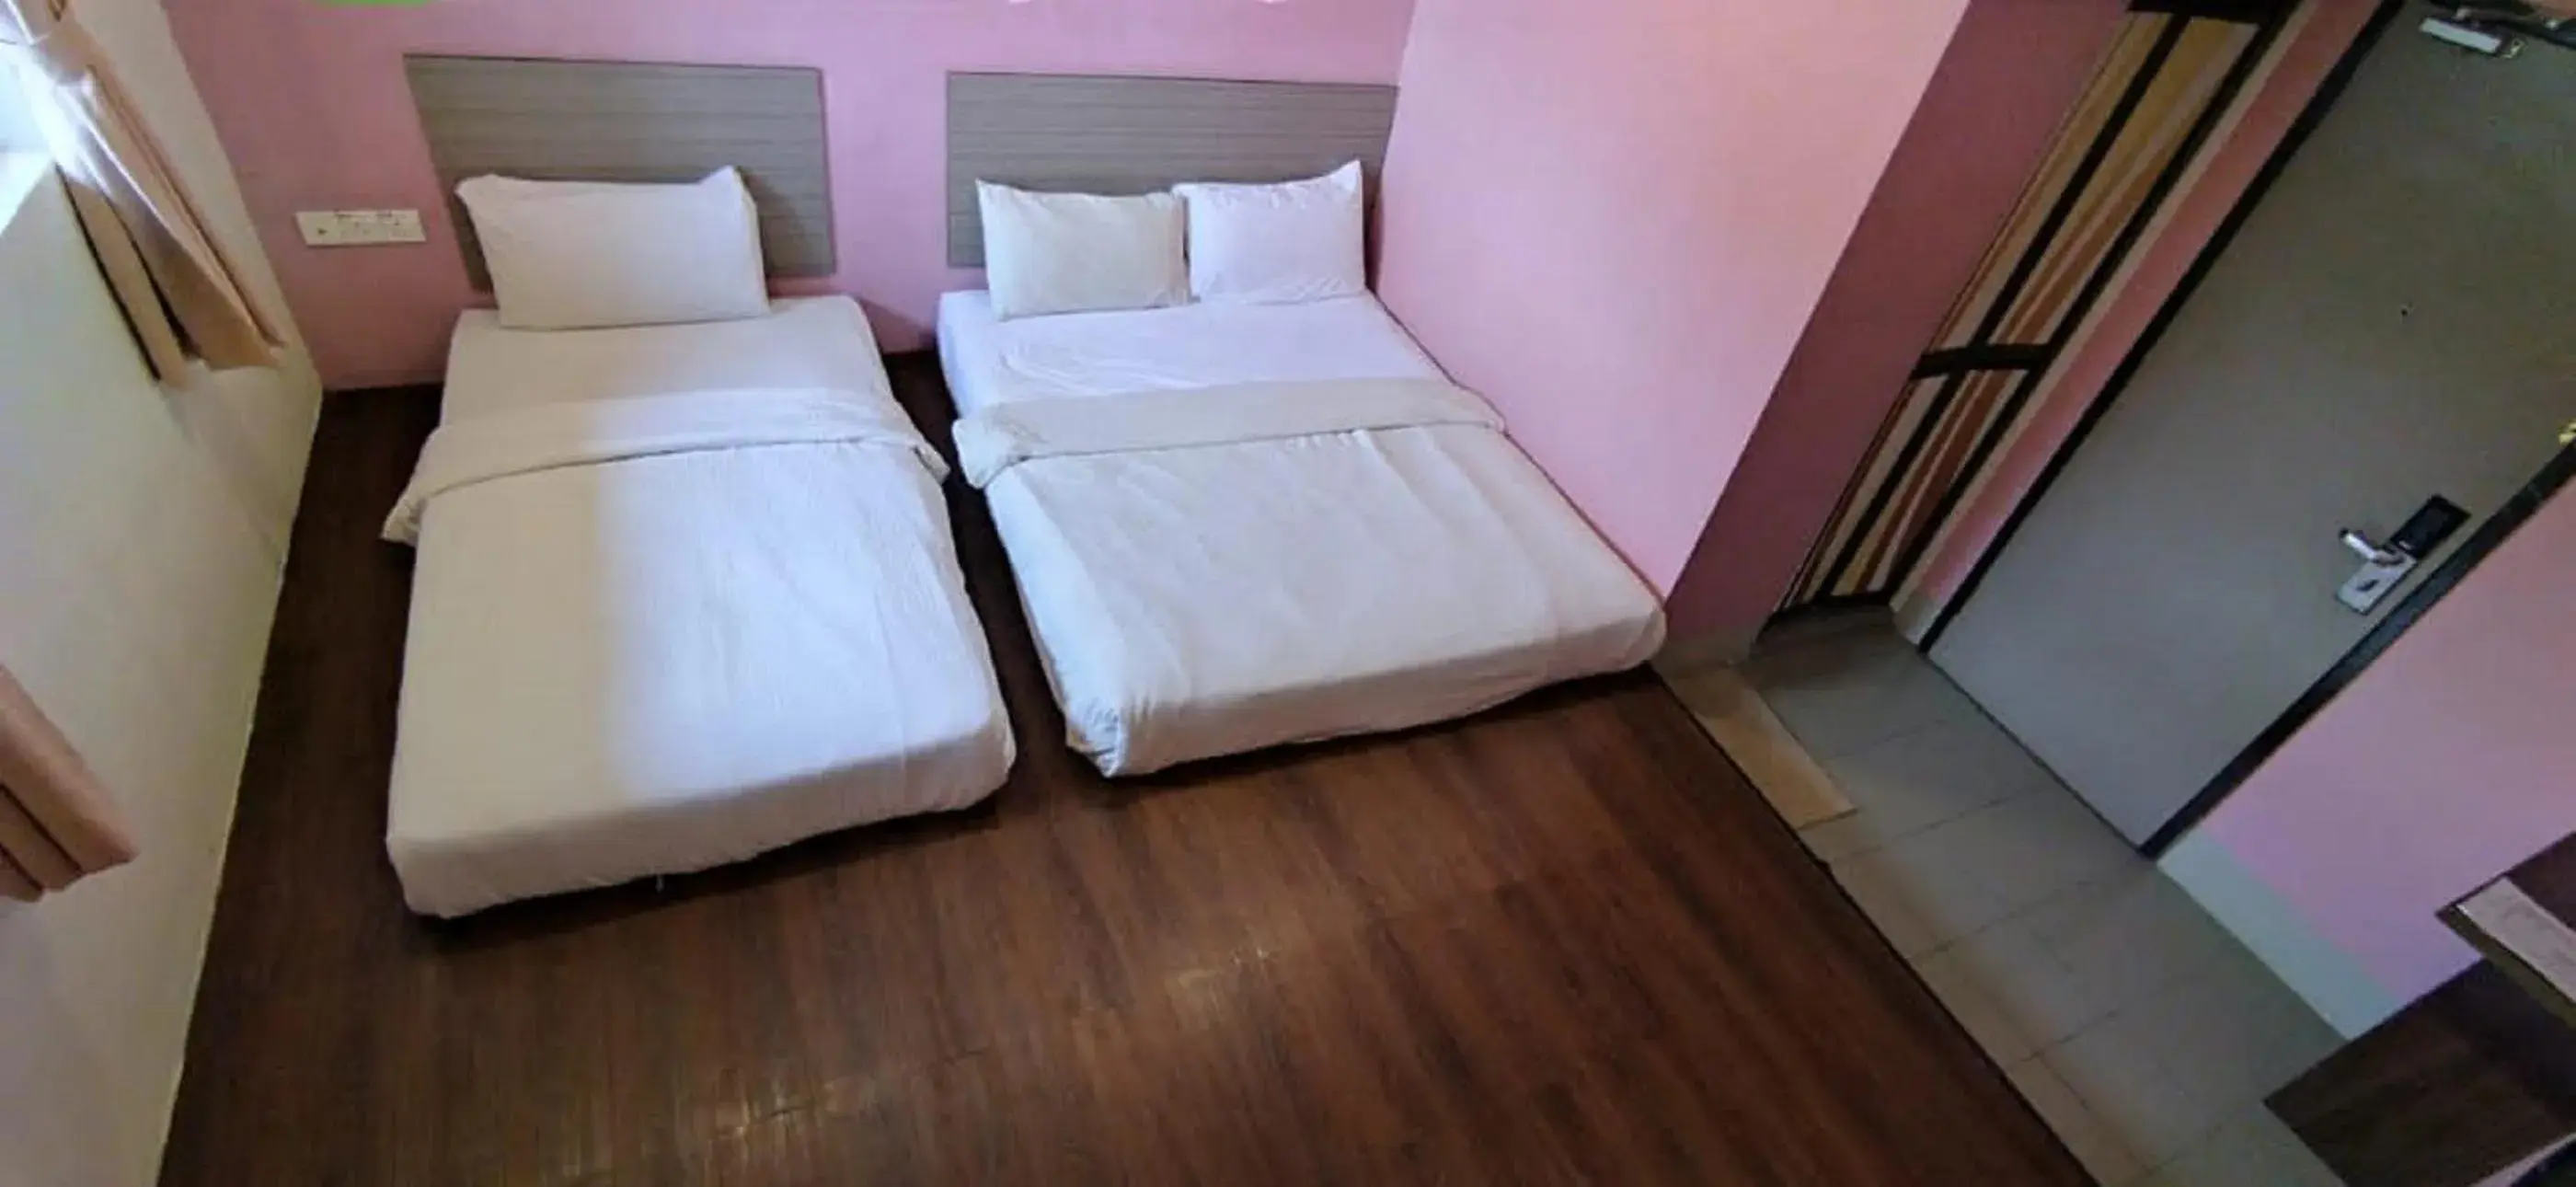 Bed in Dream House Hotel